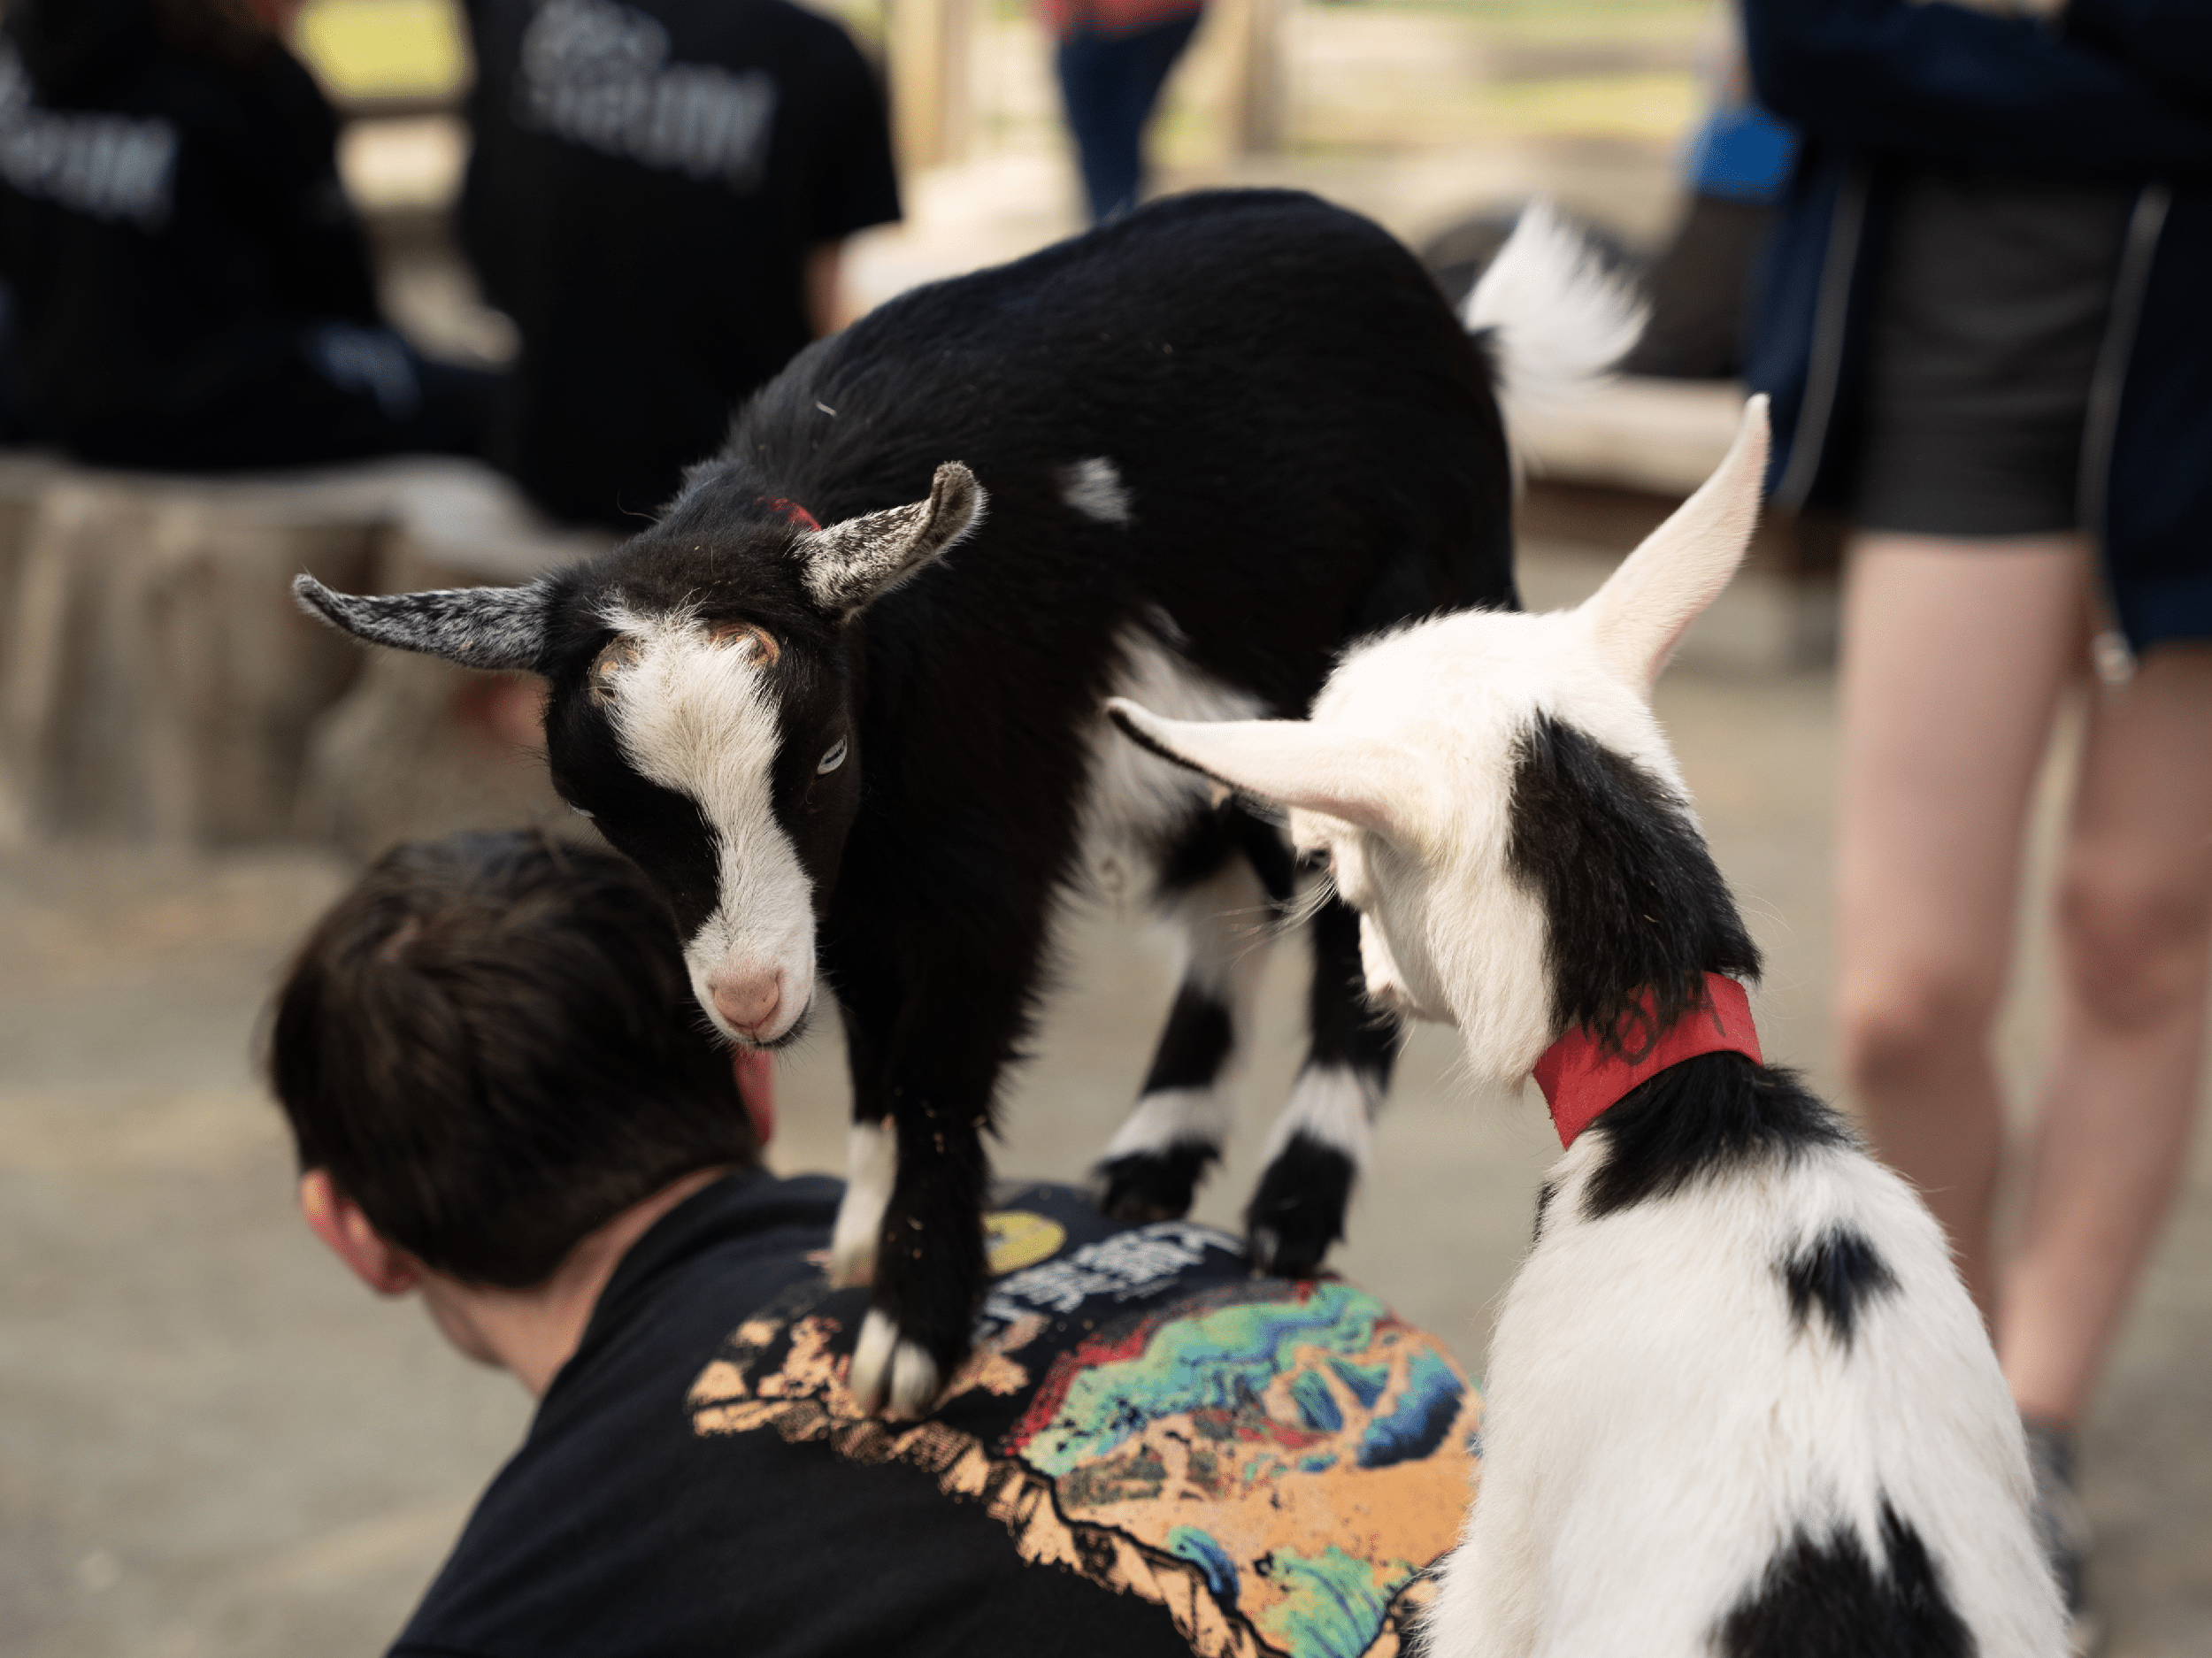 Both goat and human kids love the Beacon Hill Children's Farm!